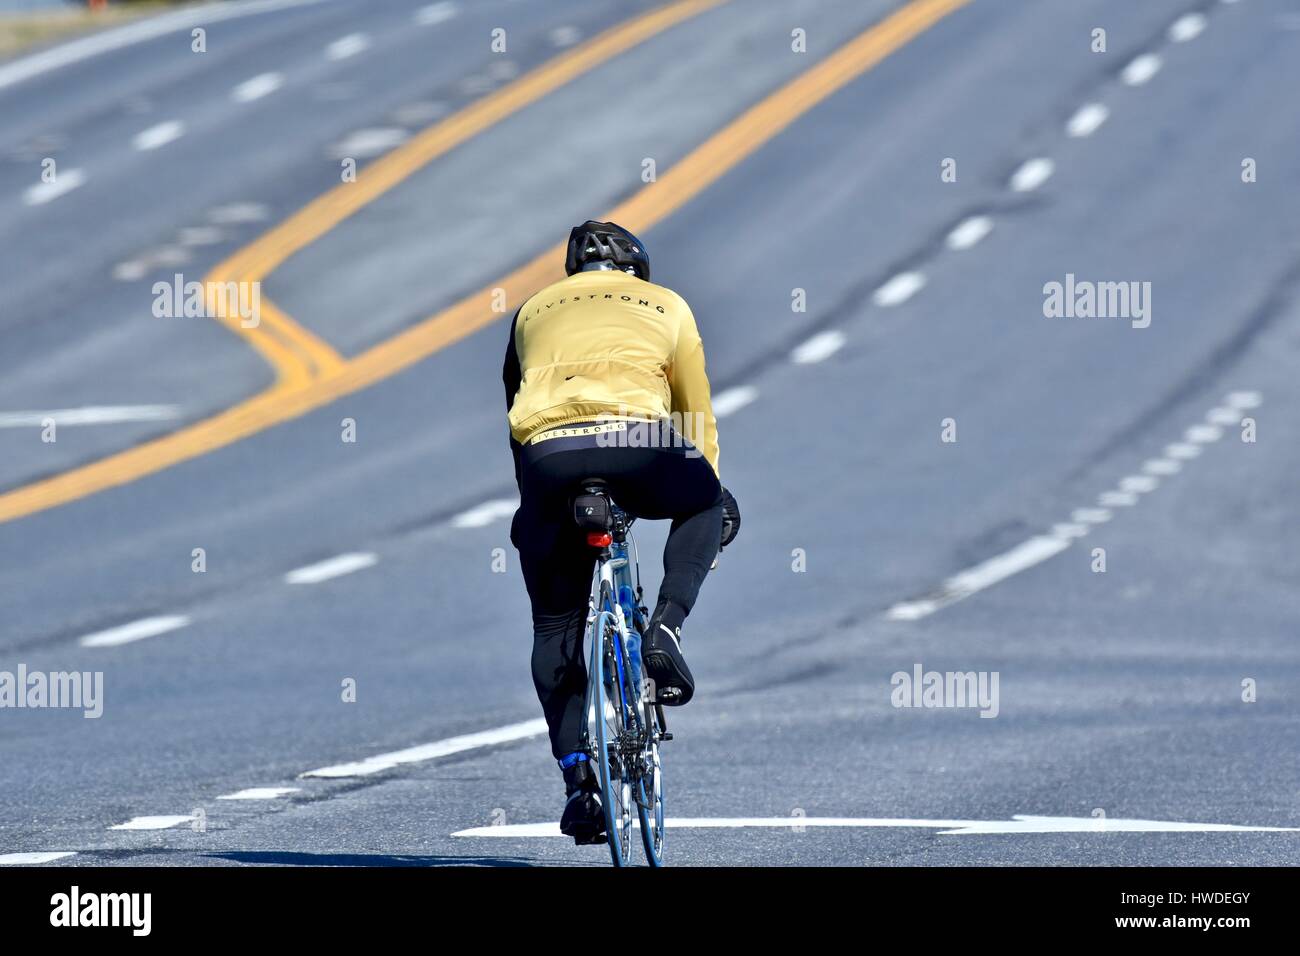 A biker in Livestrong clothing Stock Photo